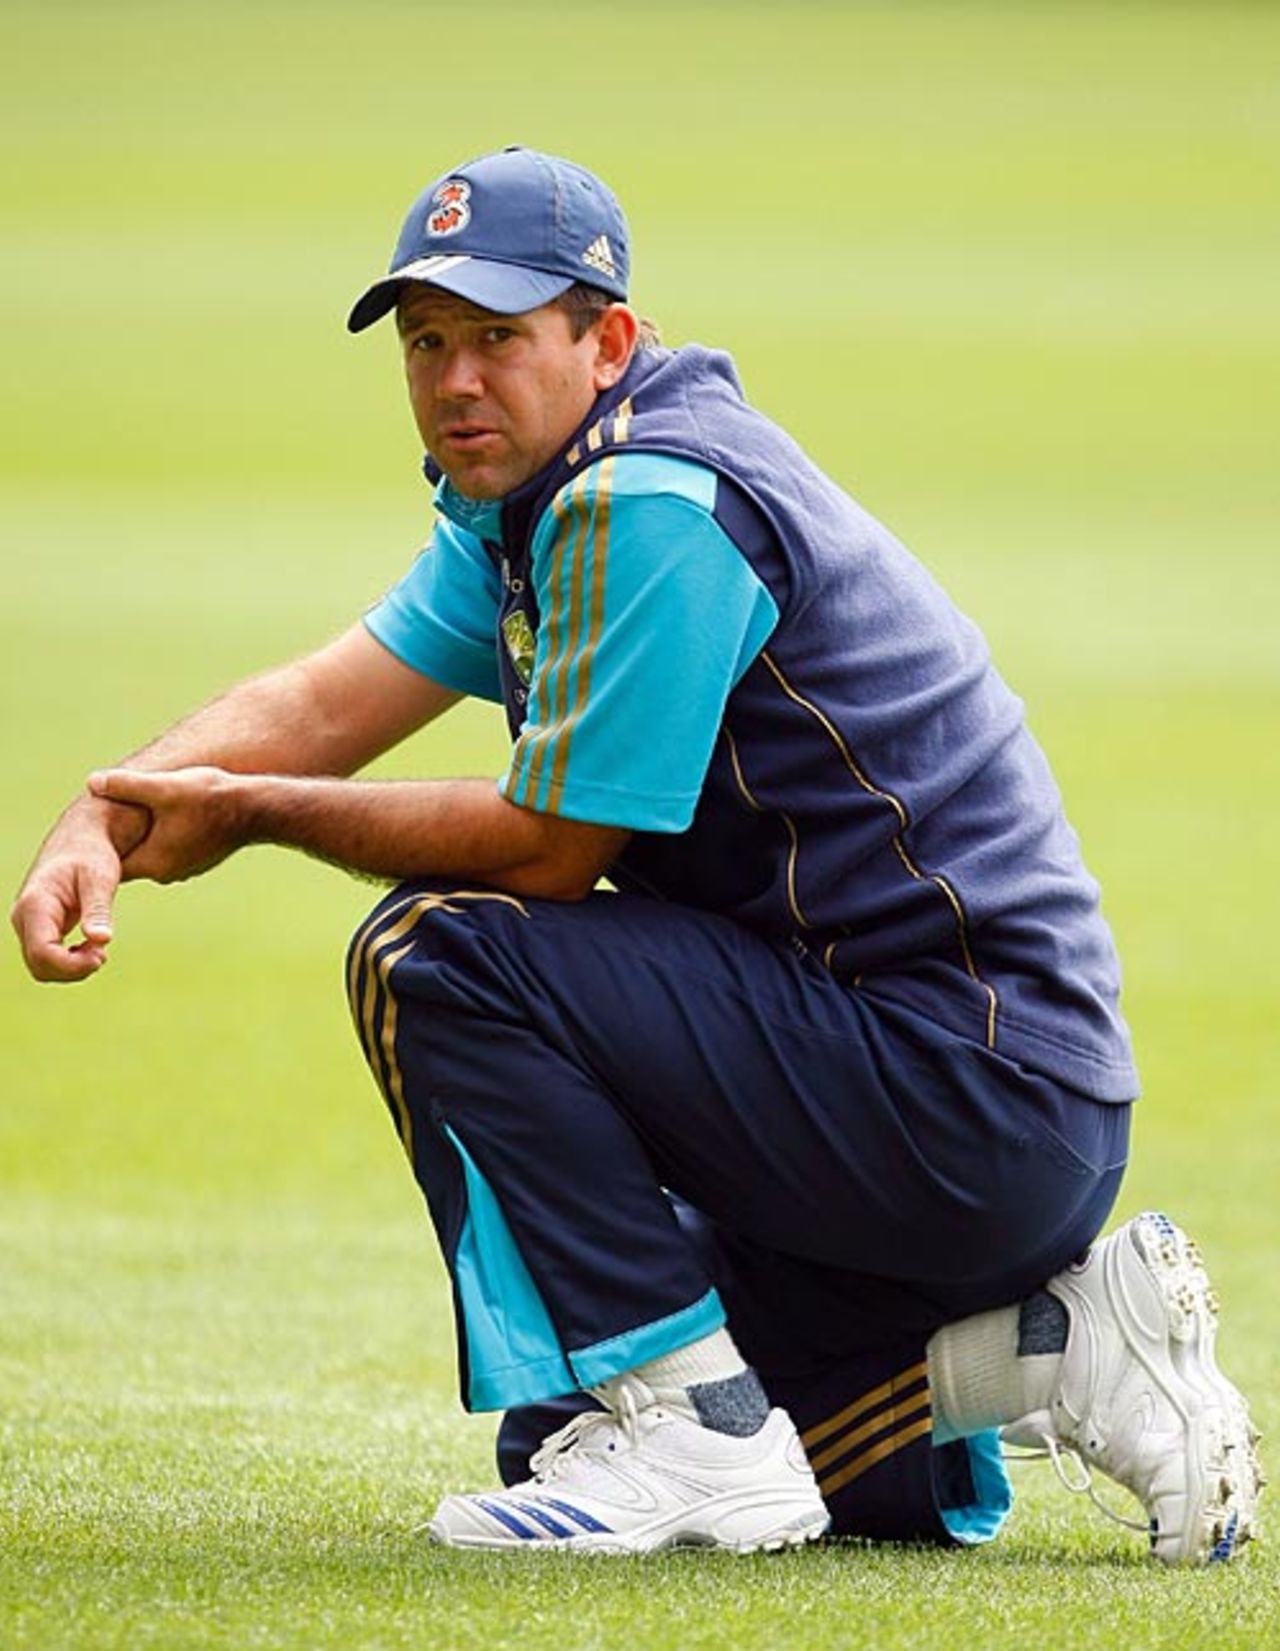 Ricky Ponting checks on his wrist during the practice session, Melbourne, December 23, 2008